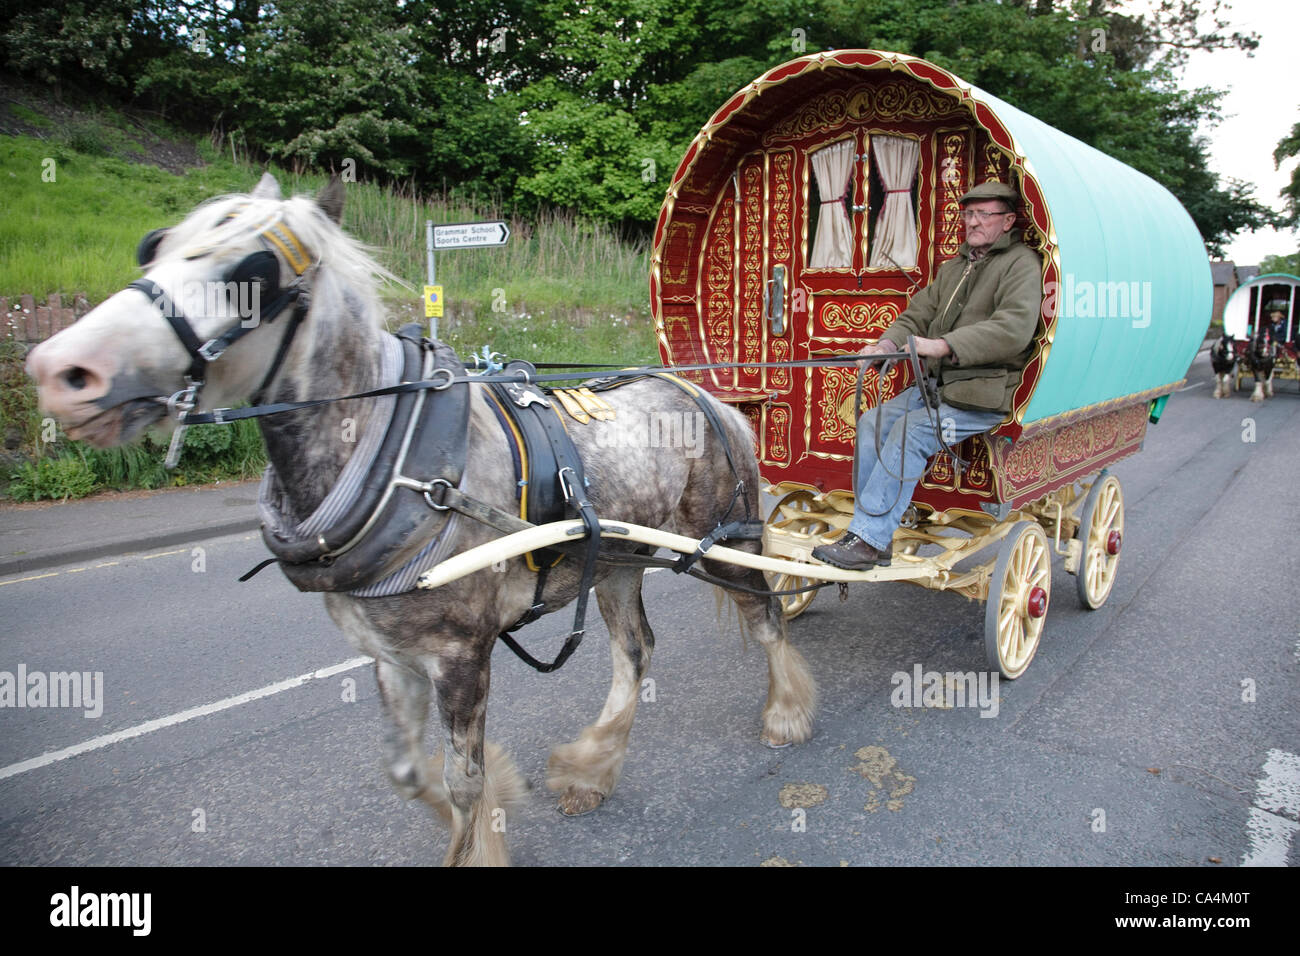 Wednesday 6th June 2012 at Appleby, Cumbria, England, UK. Horse drawn bow-top wagons arrive from all over the UK for Appleby Fair, the biggest annual gathering of Gypsies and Travellers in Europe. Trevor Jones (pictured)  has spent three weeks on the road to reach the fair from The Wirral. The fair Stock Photo